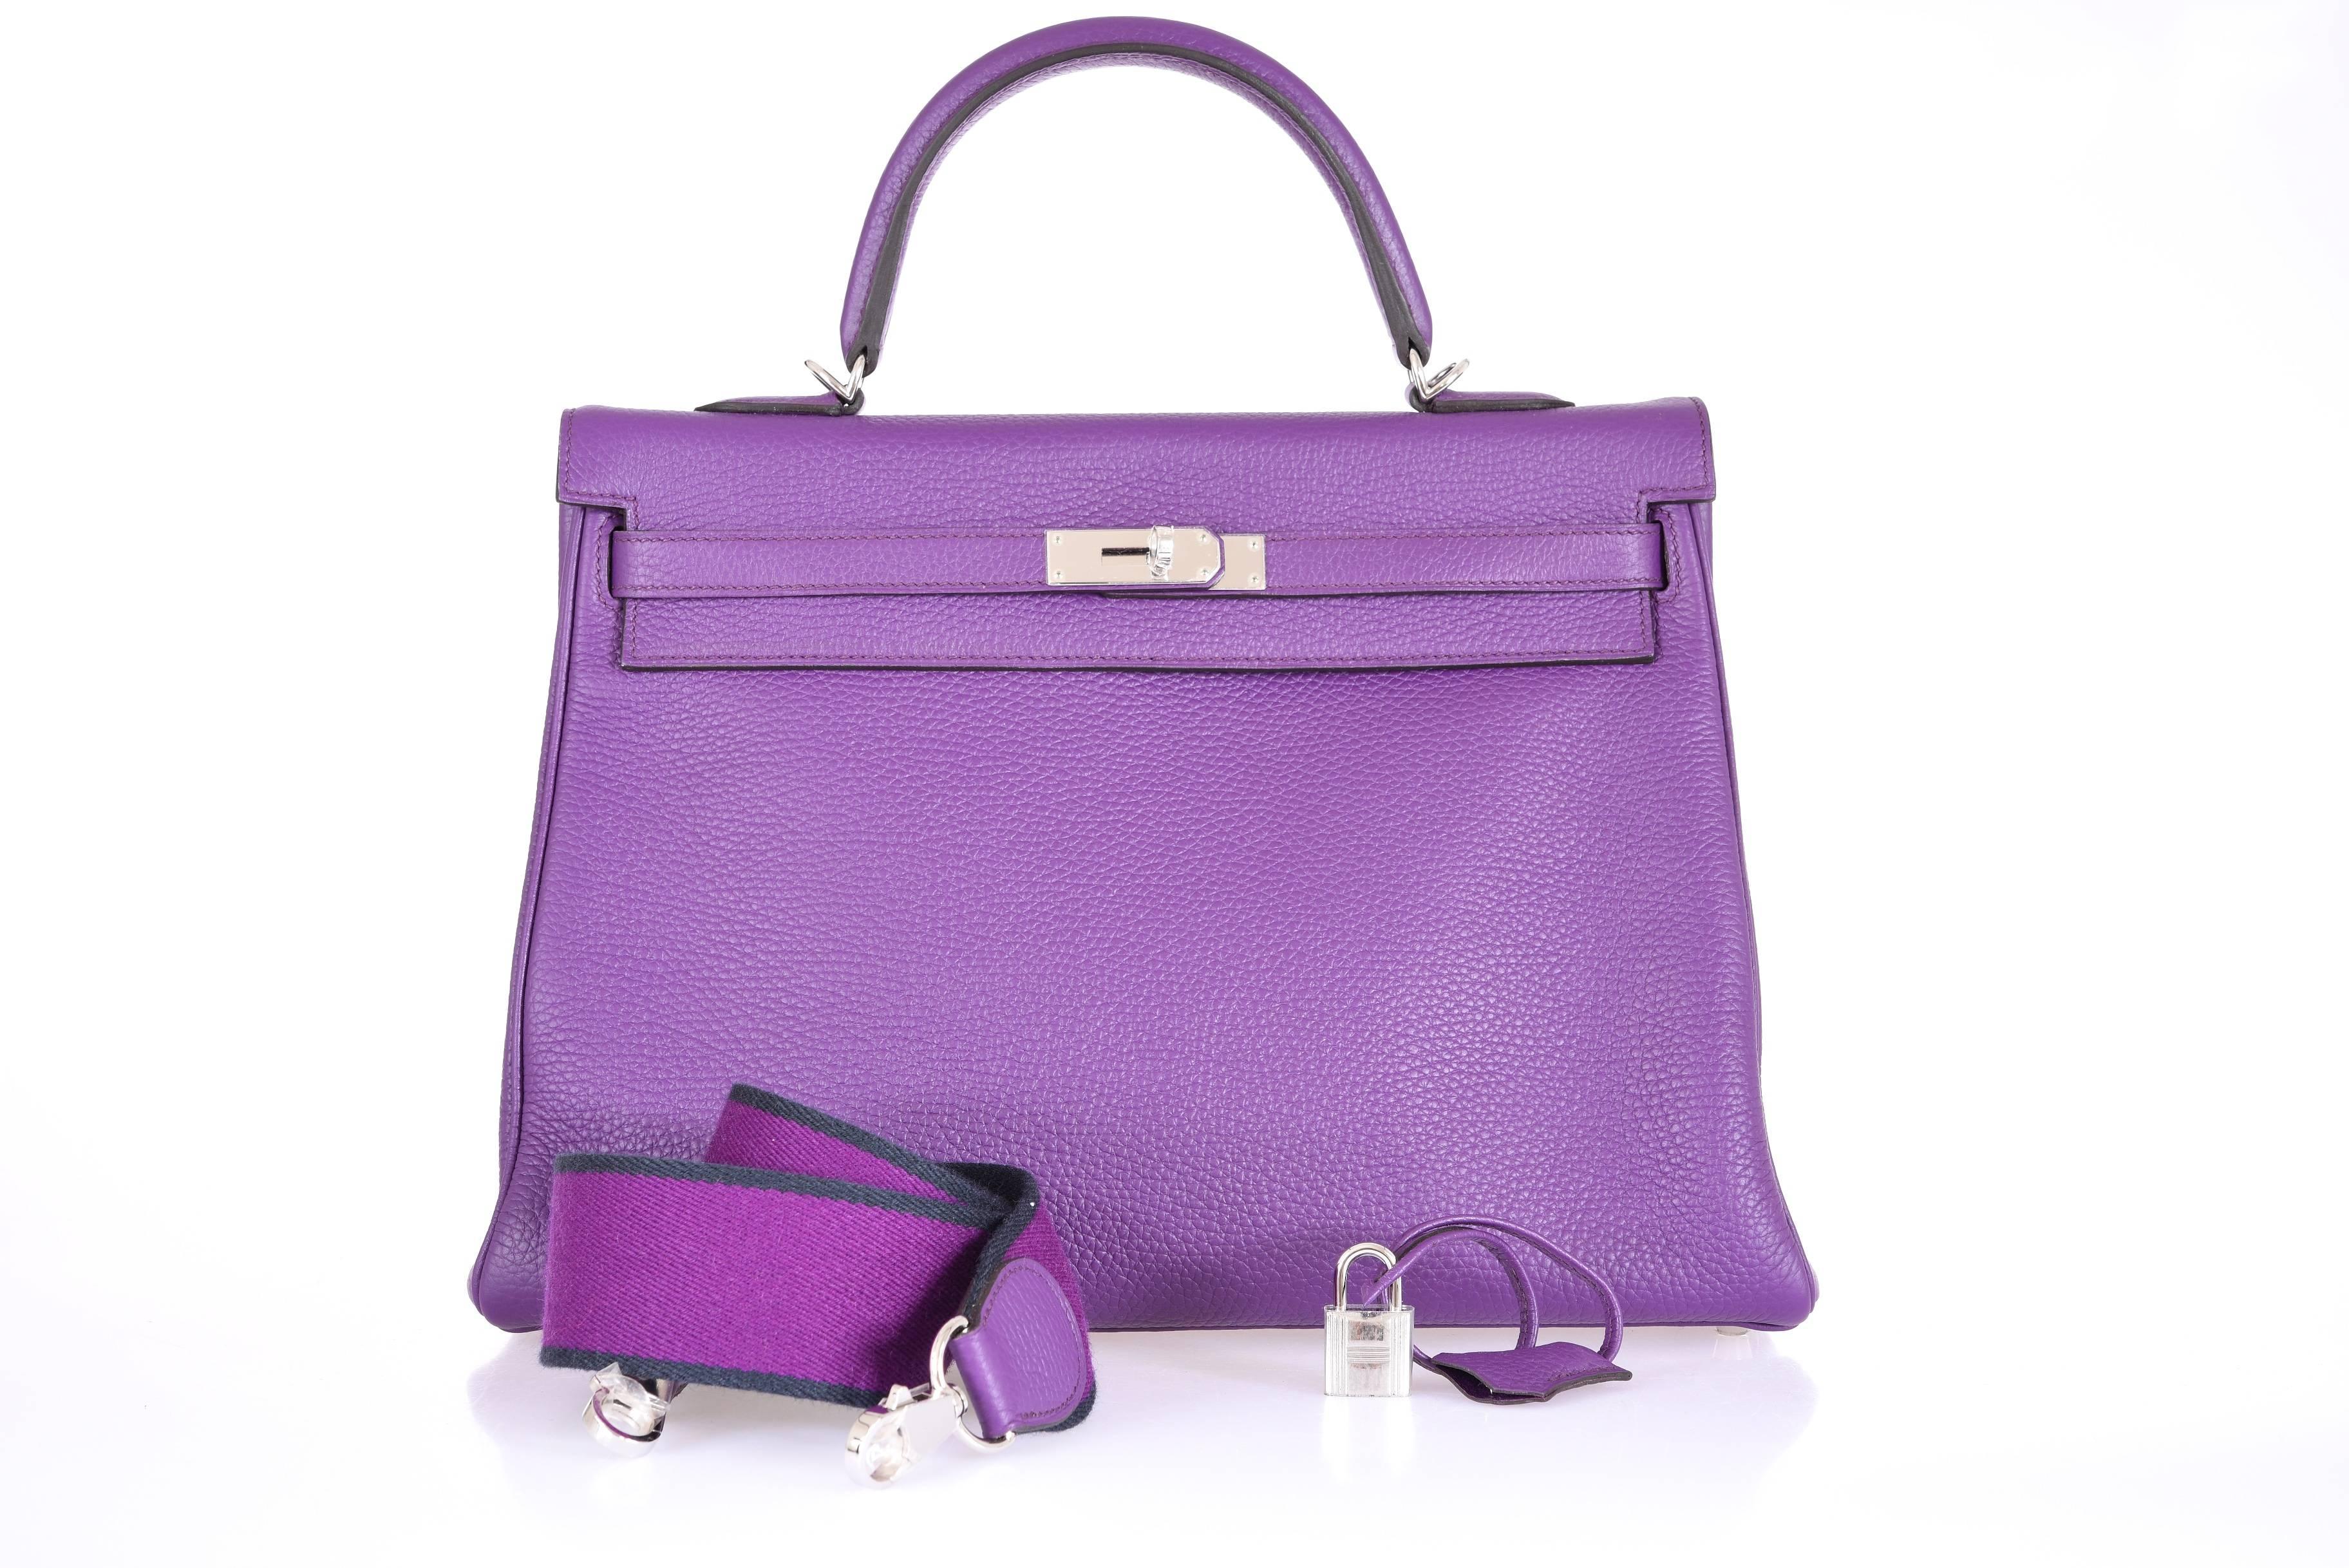 This color is classic stunning!

Gorgeous 35cm new Ultra Violet Clemence leather Kelly with Chevre interior and palladium hardware.

Here is your chance to grab this bag! Fabulous bag!
BAG ONLY. Clothing not included with purchase. 

Comes with the